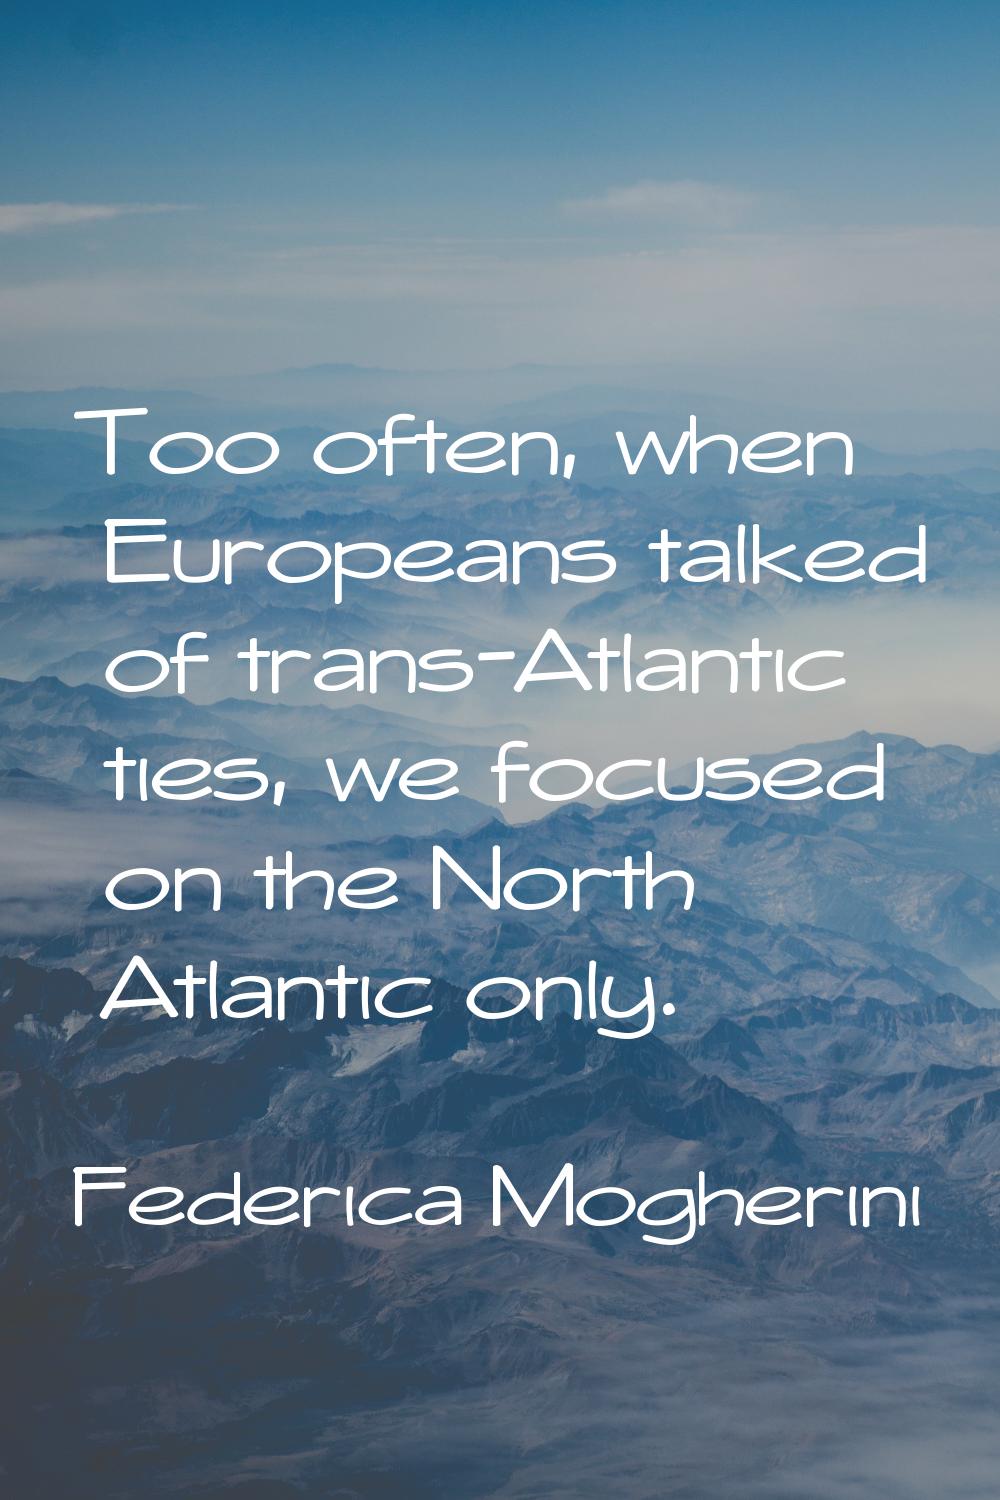 Too often, when Europeans talked of trans-Atlantic ties, we focused on the North Atlantic only.